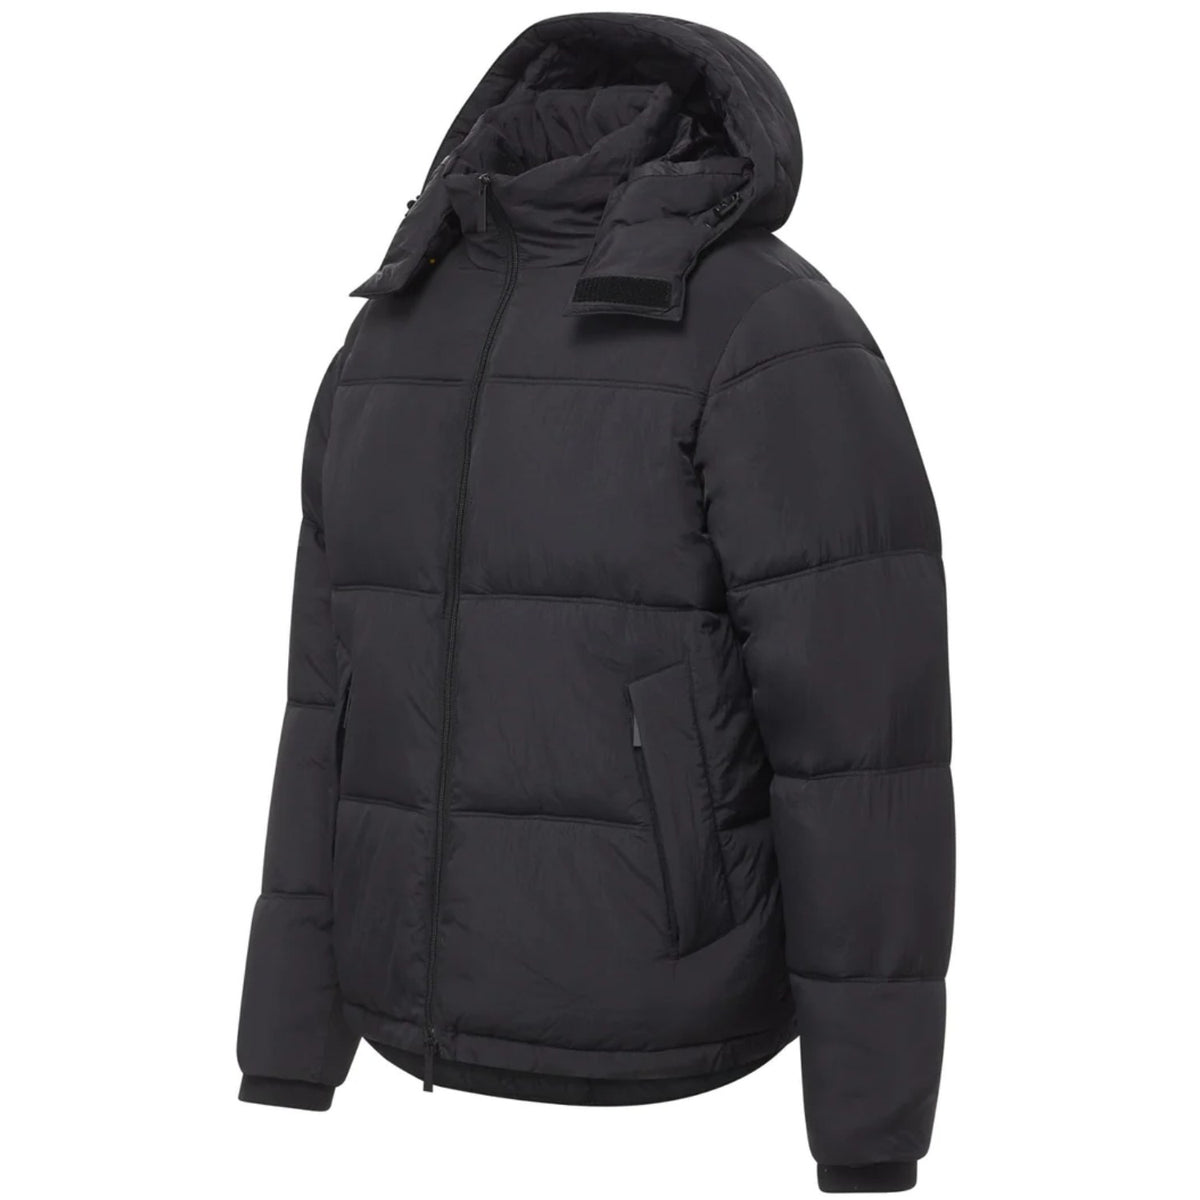 The Very Warm - Puffer Jacket - Black Polyfilled